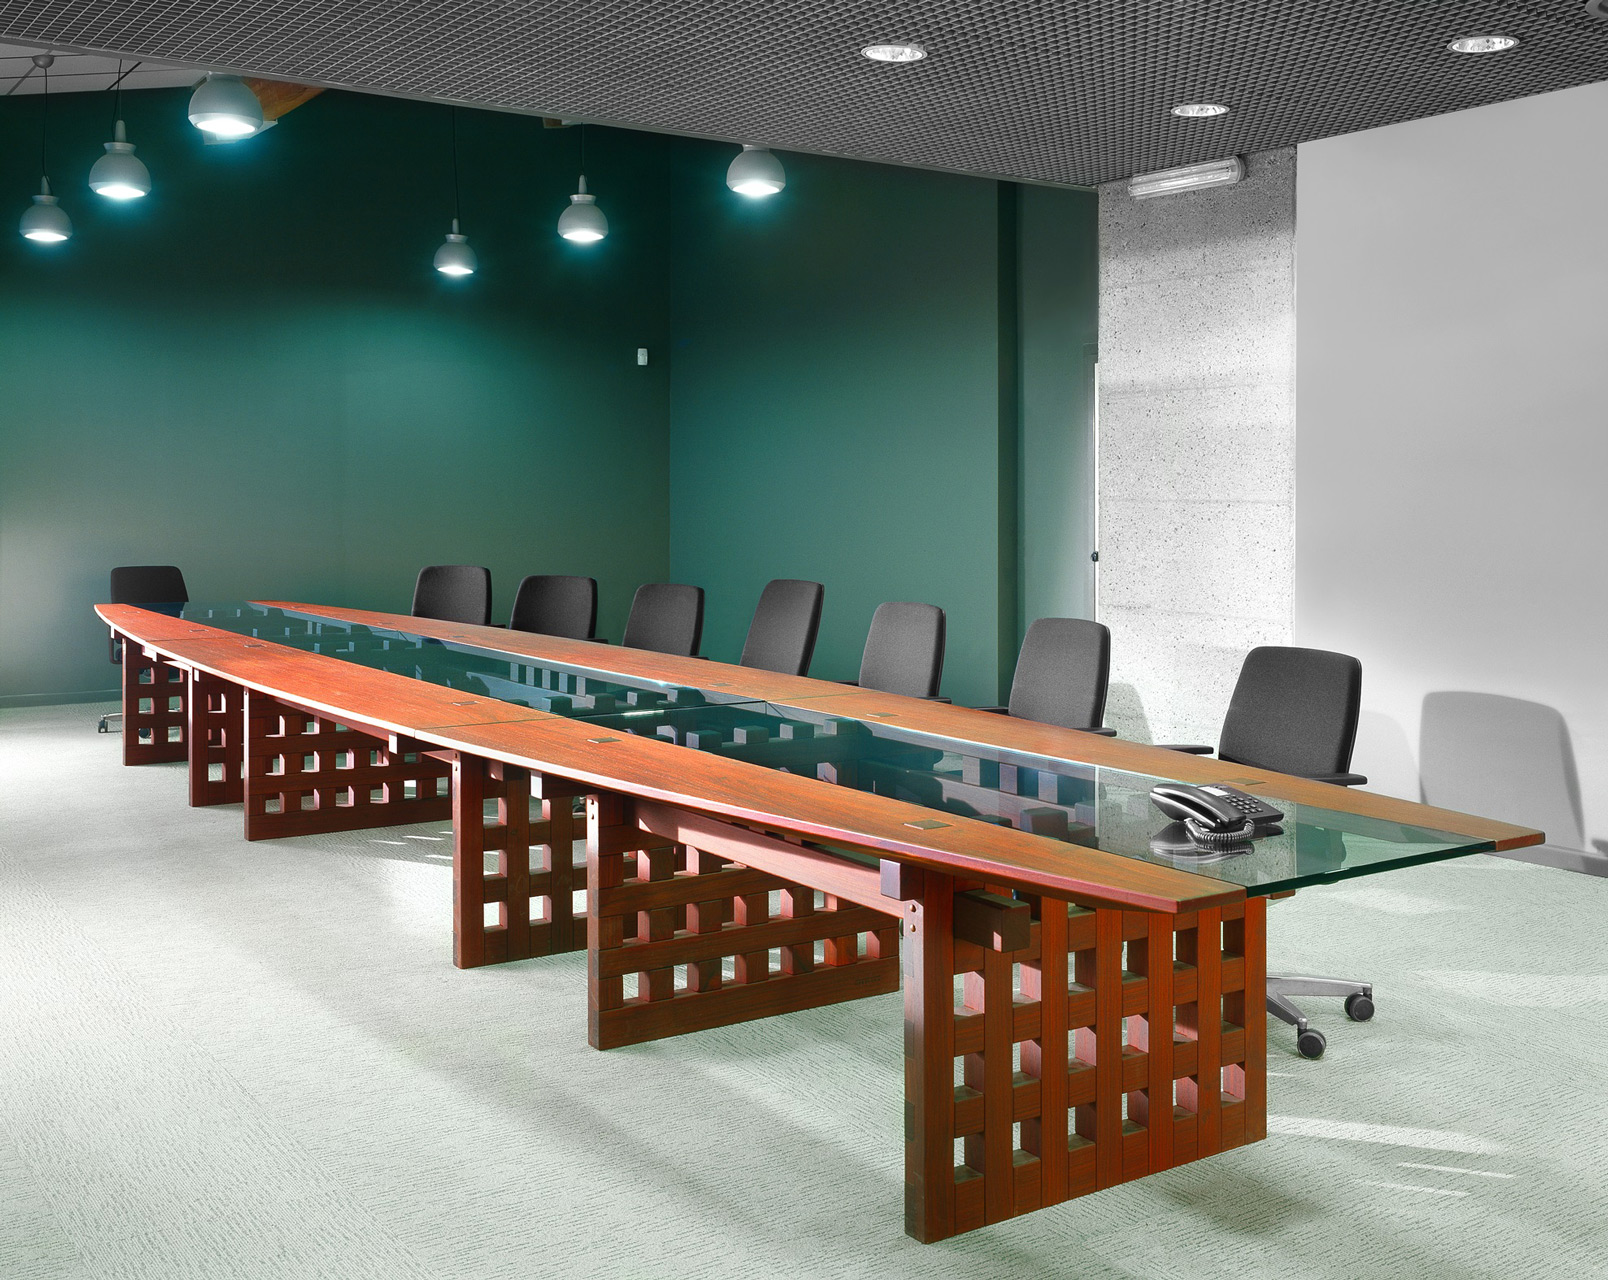 Conference table in paduak wood.